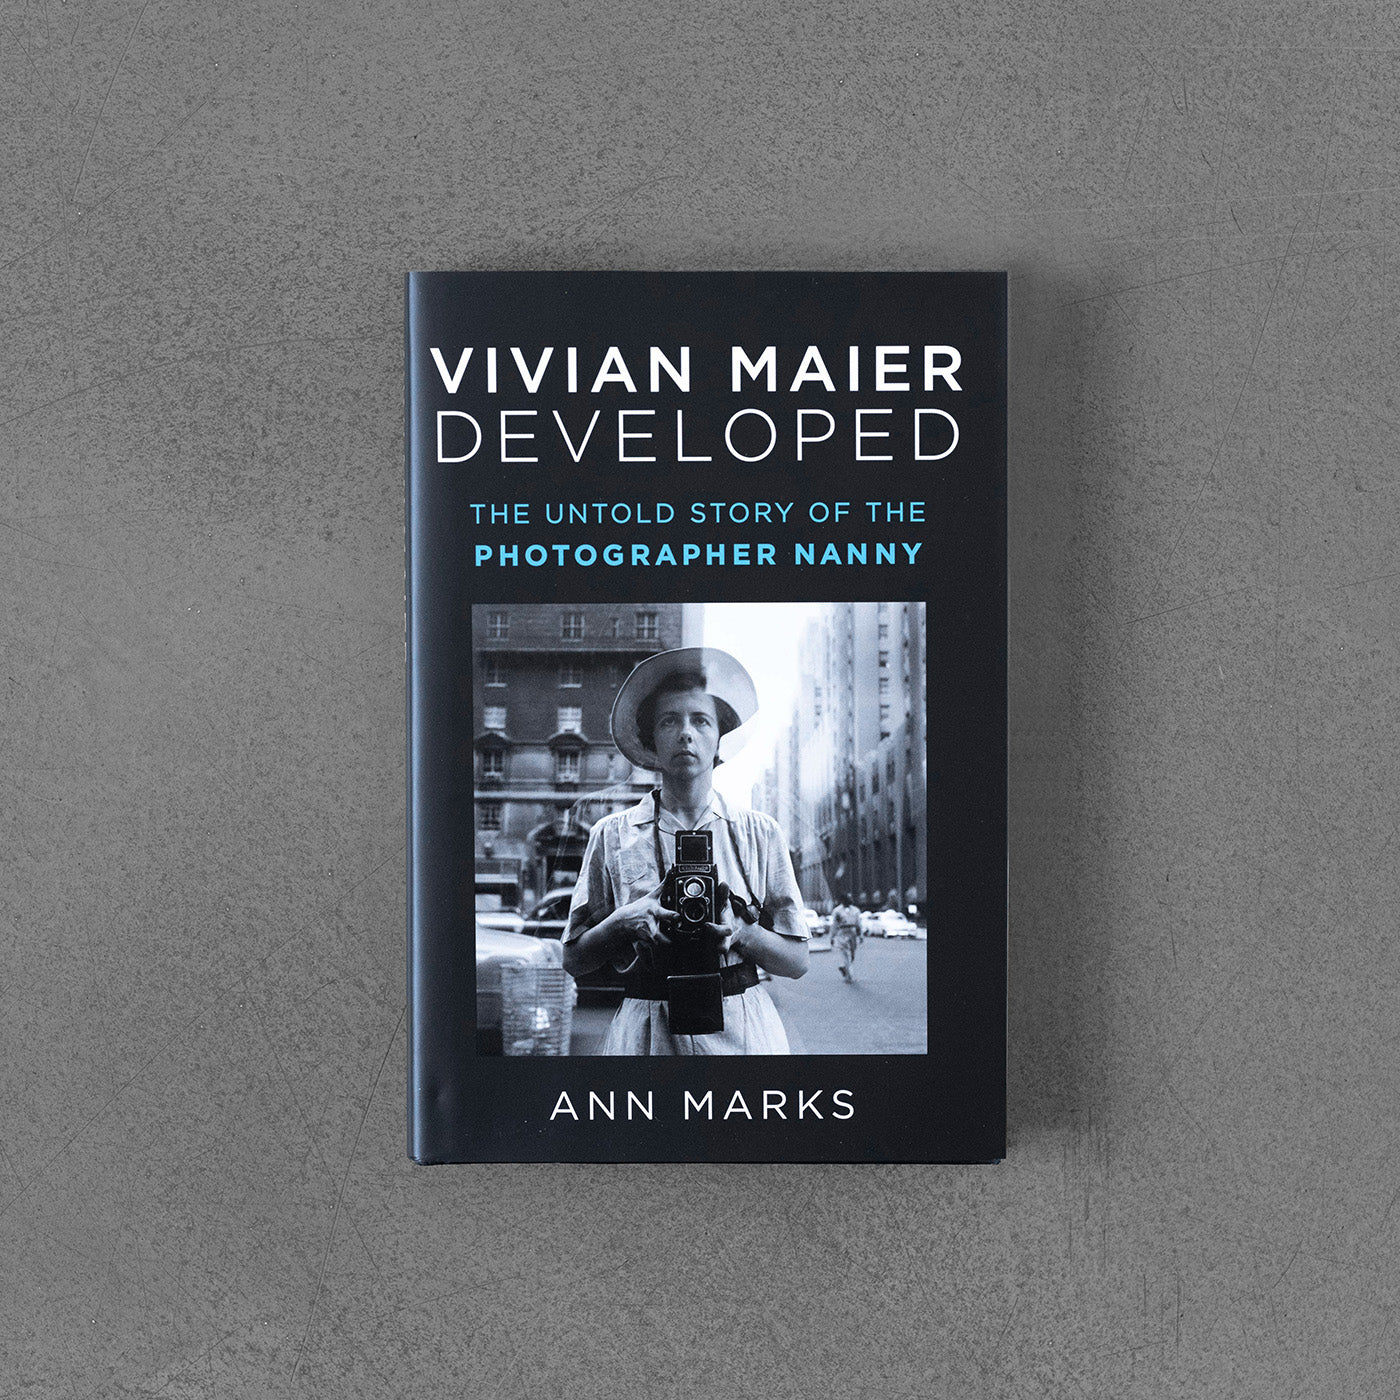 Vivian Maier Developed.The Untold Story of the Photographer Nanny